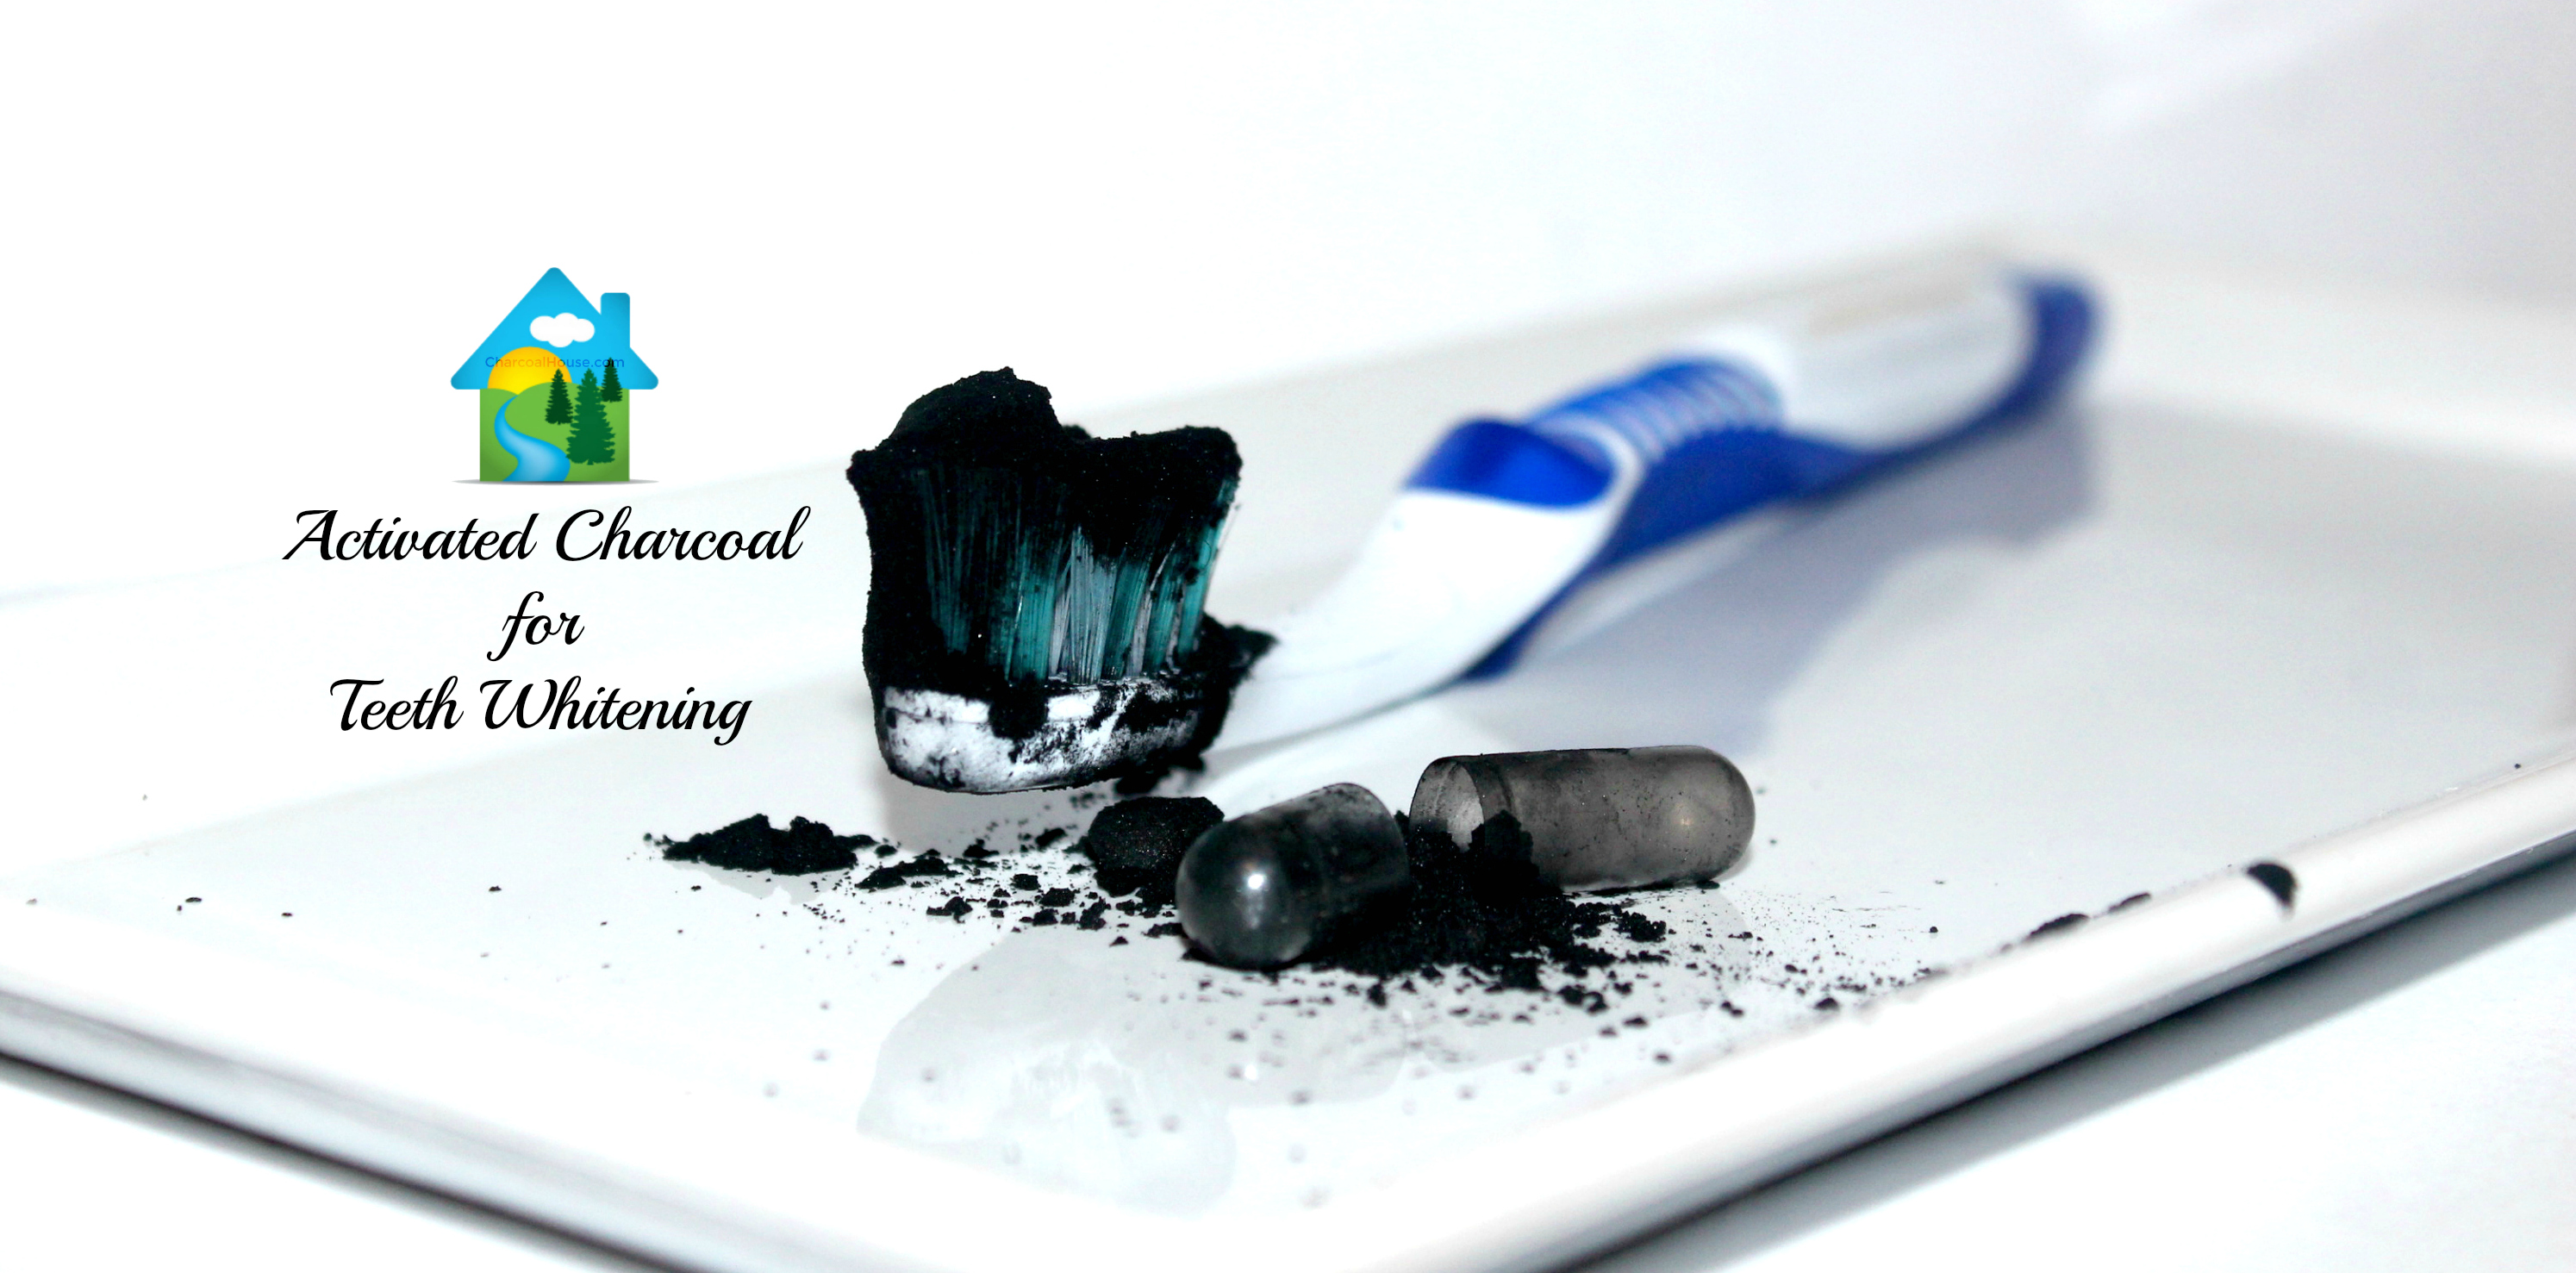 Activated Charcoal for Teeth Whitening header - Teeth Whitening: Brushing with Activated Charcoal